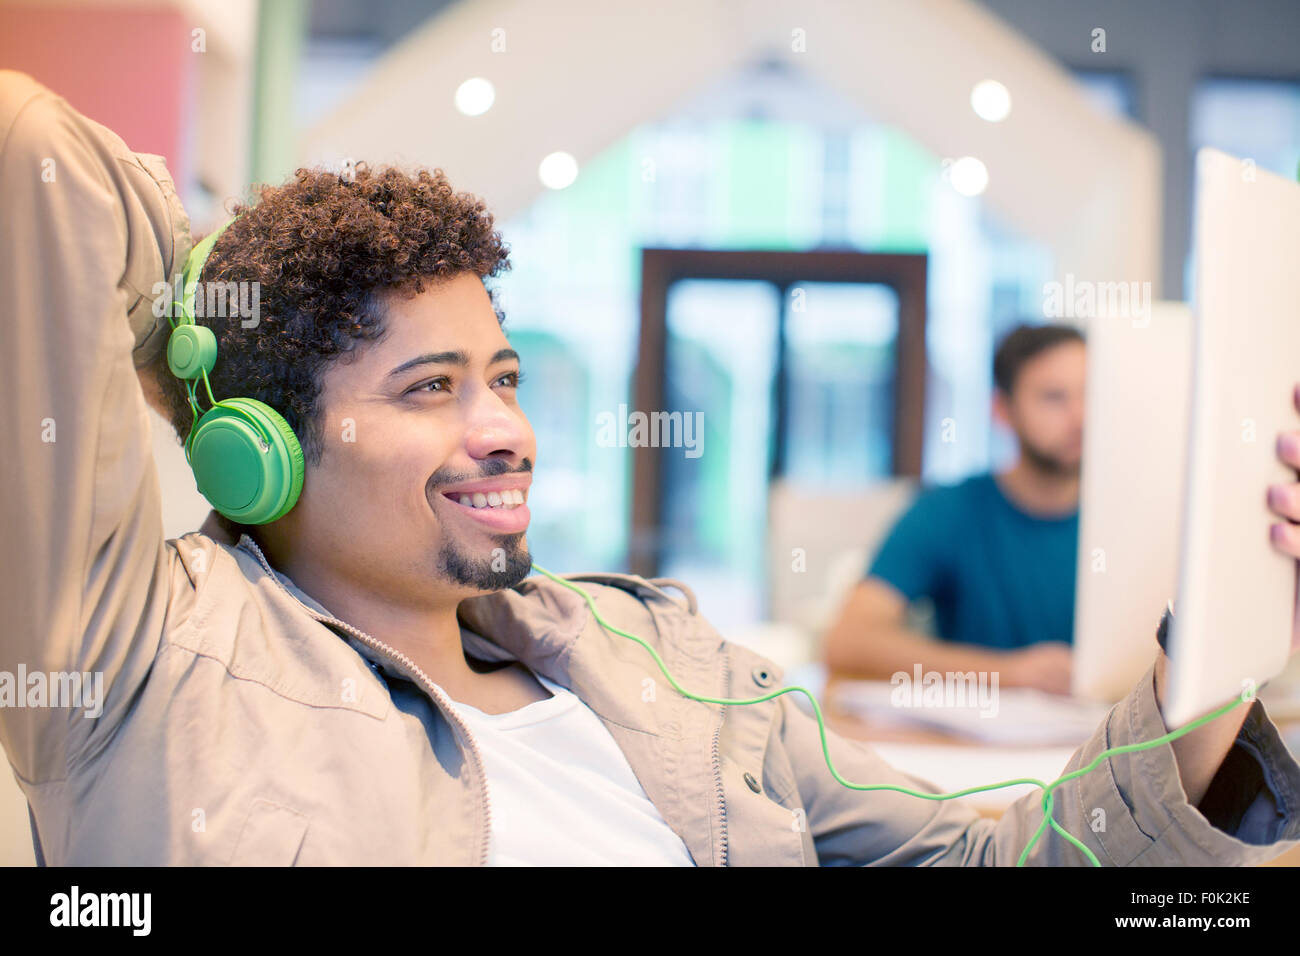 Creative businessman listening to headphones and using digital tablet Banque D'Images